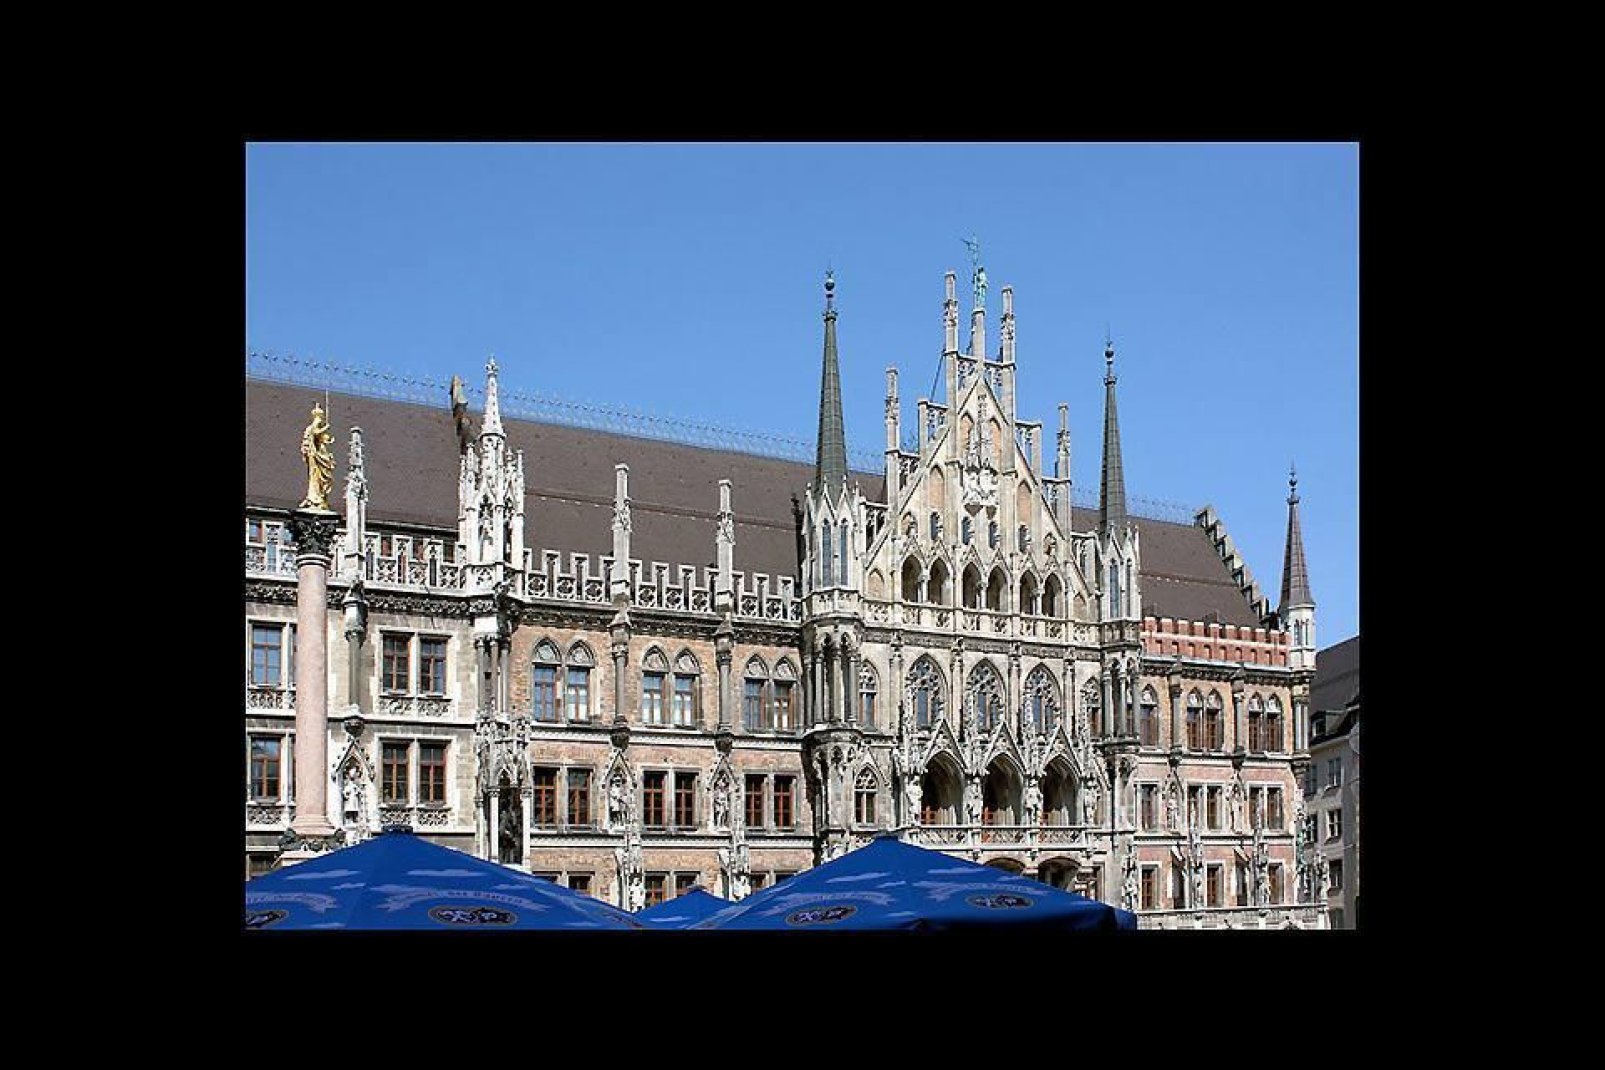 This wonderful Neo-Gothic style building stands facing Marienplatz, Munich's central square.